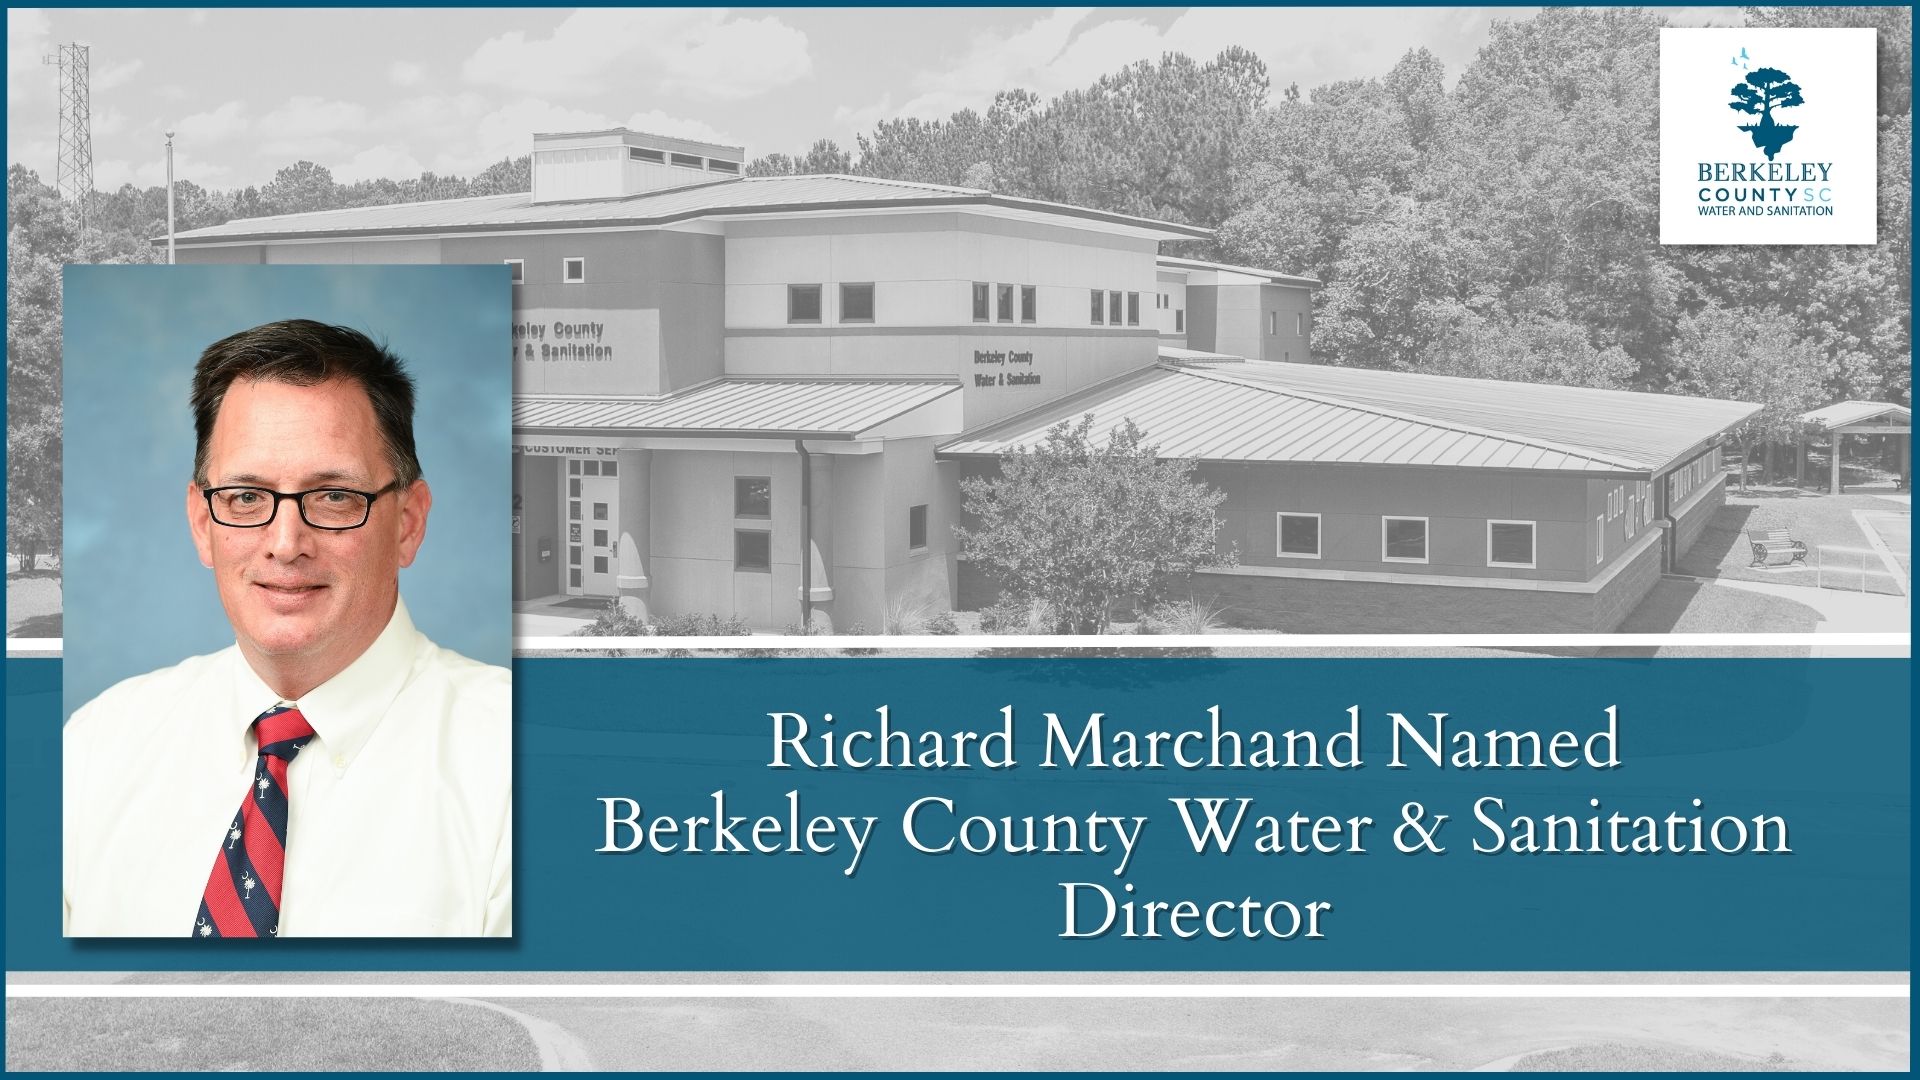 Richard Marchand Named Berkeley County Water and Sanitation Director